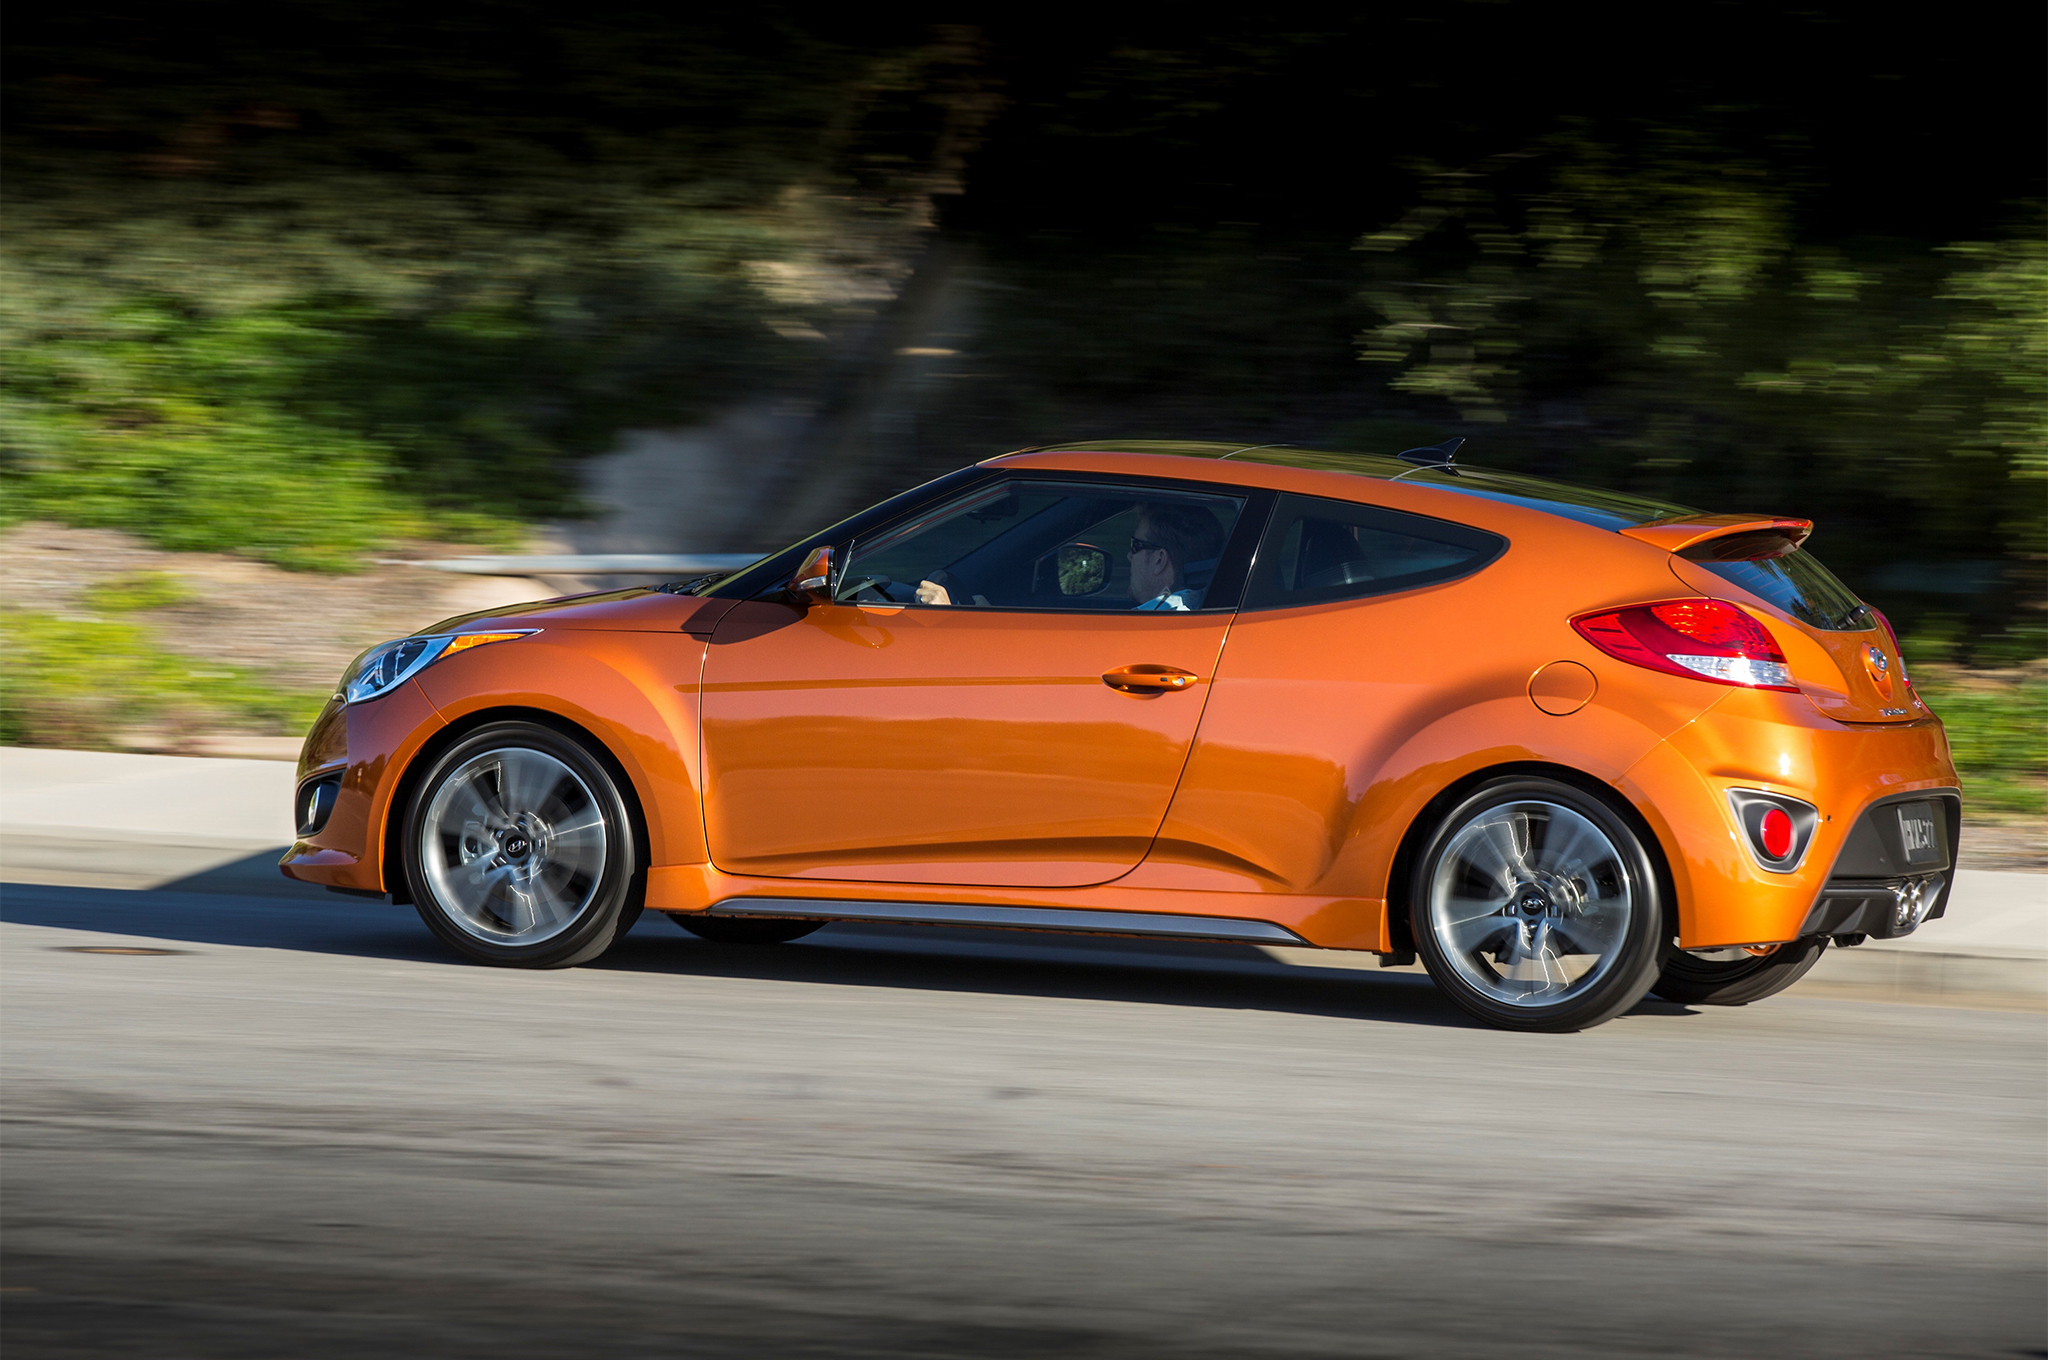 Hyundai Veloster Wallpapers Vehicles Hq Hyundai Veloster Pictures 4k Wallpapers 2019